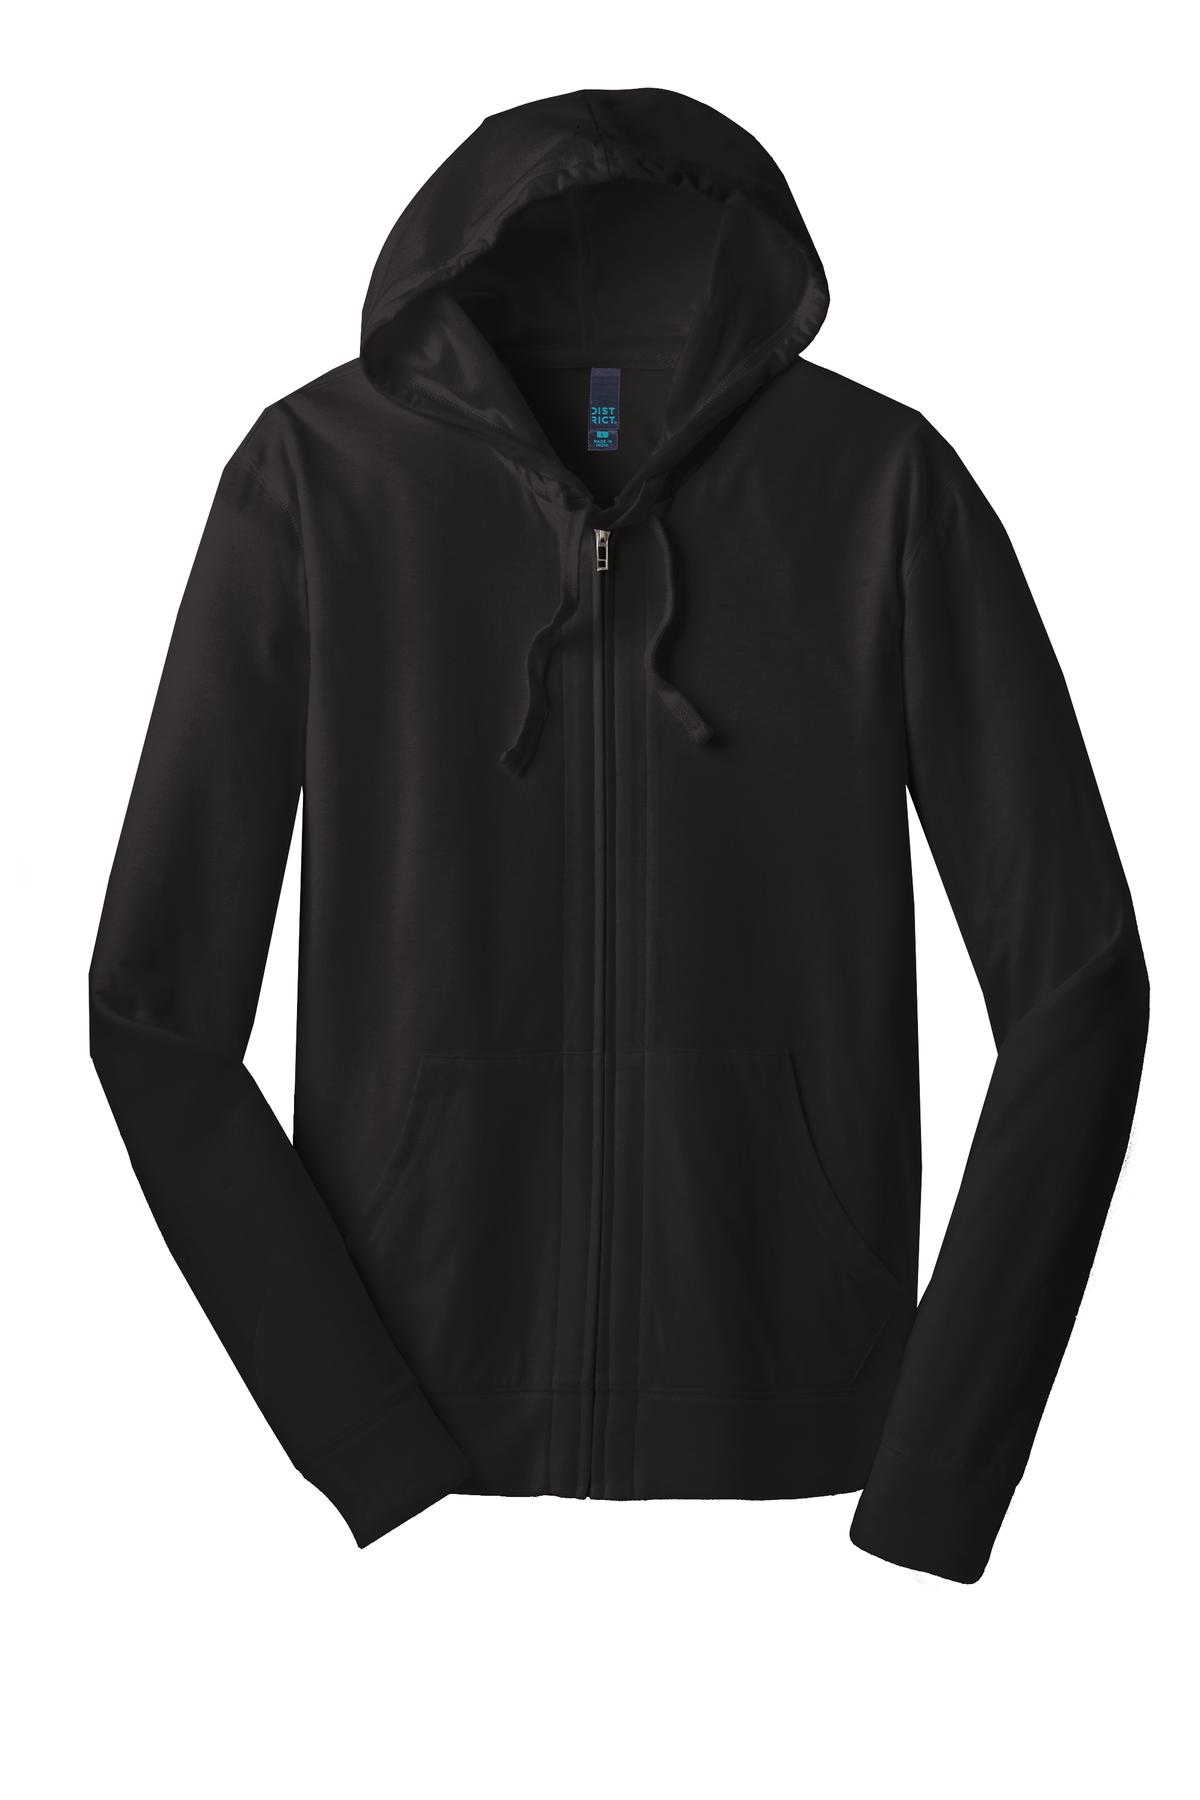 District Young Mens Jersey Full Zip Hoodie-3XL (Black) - image 5 of 6